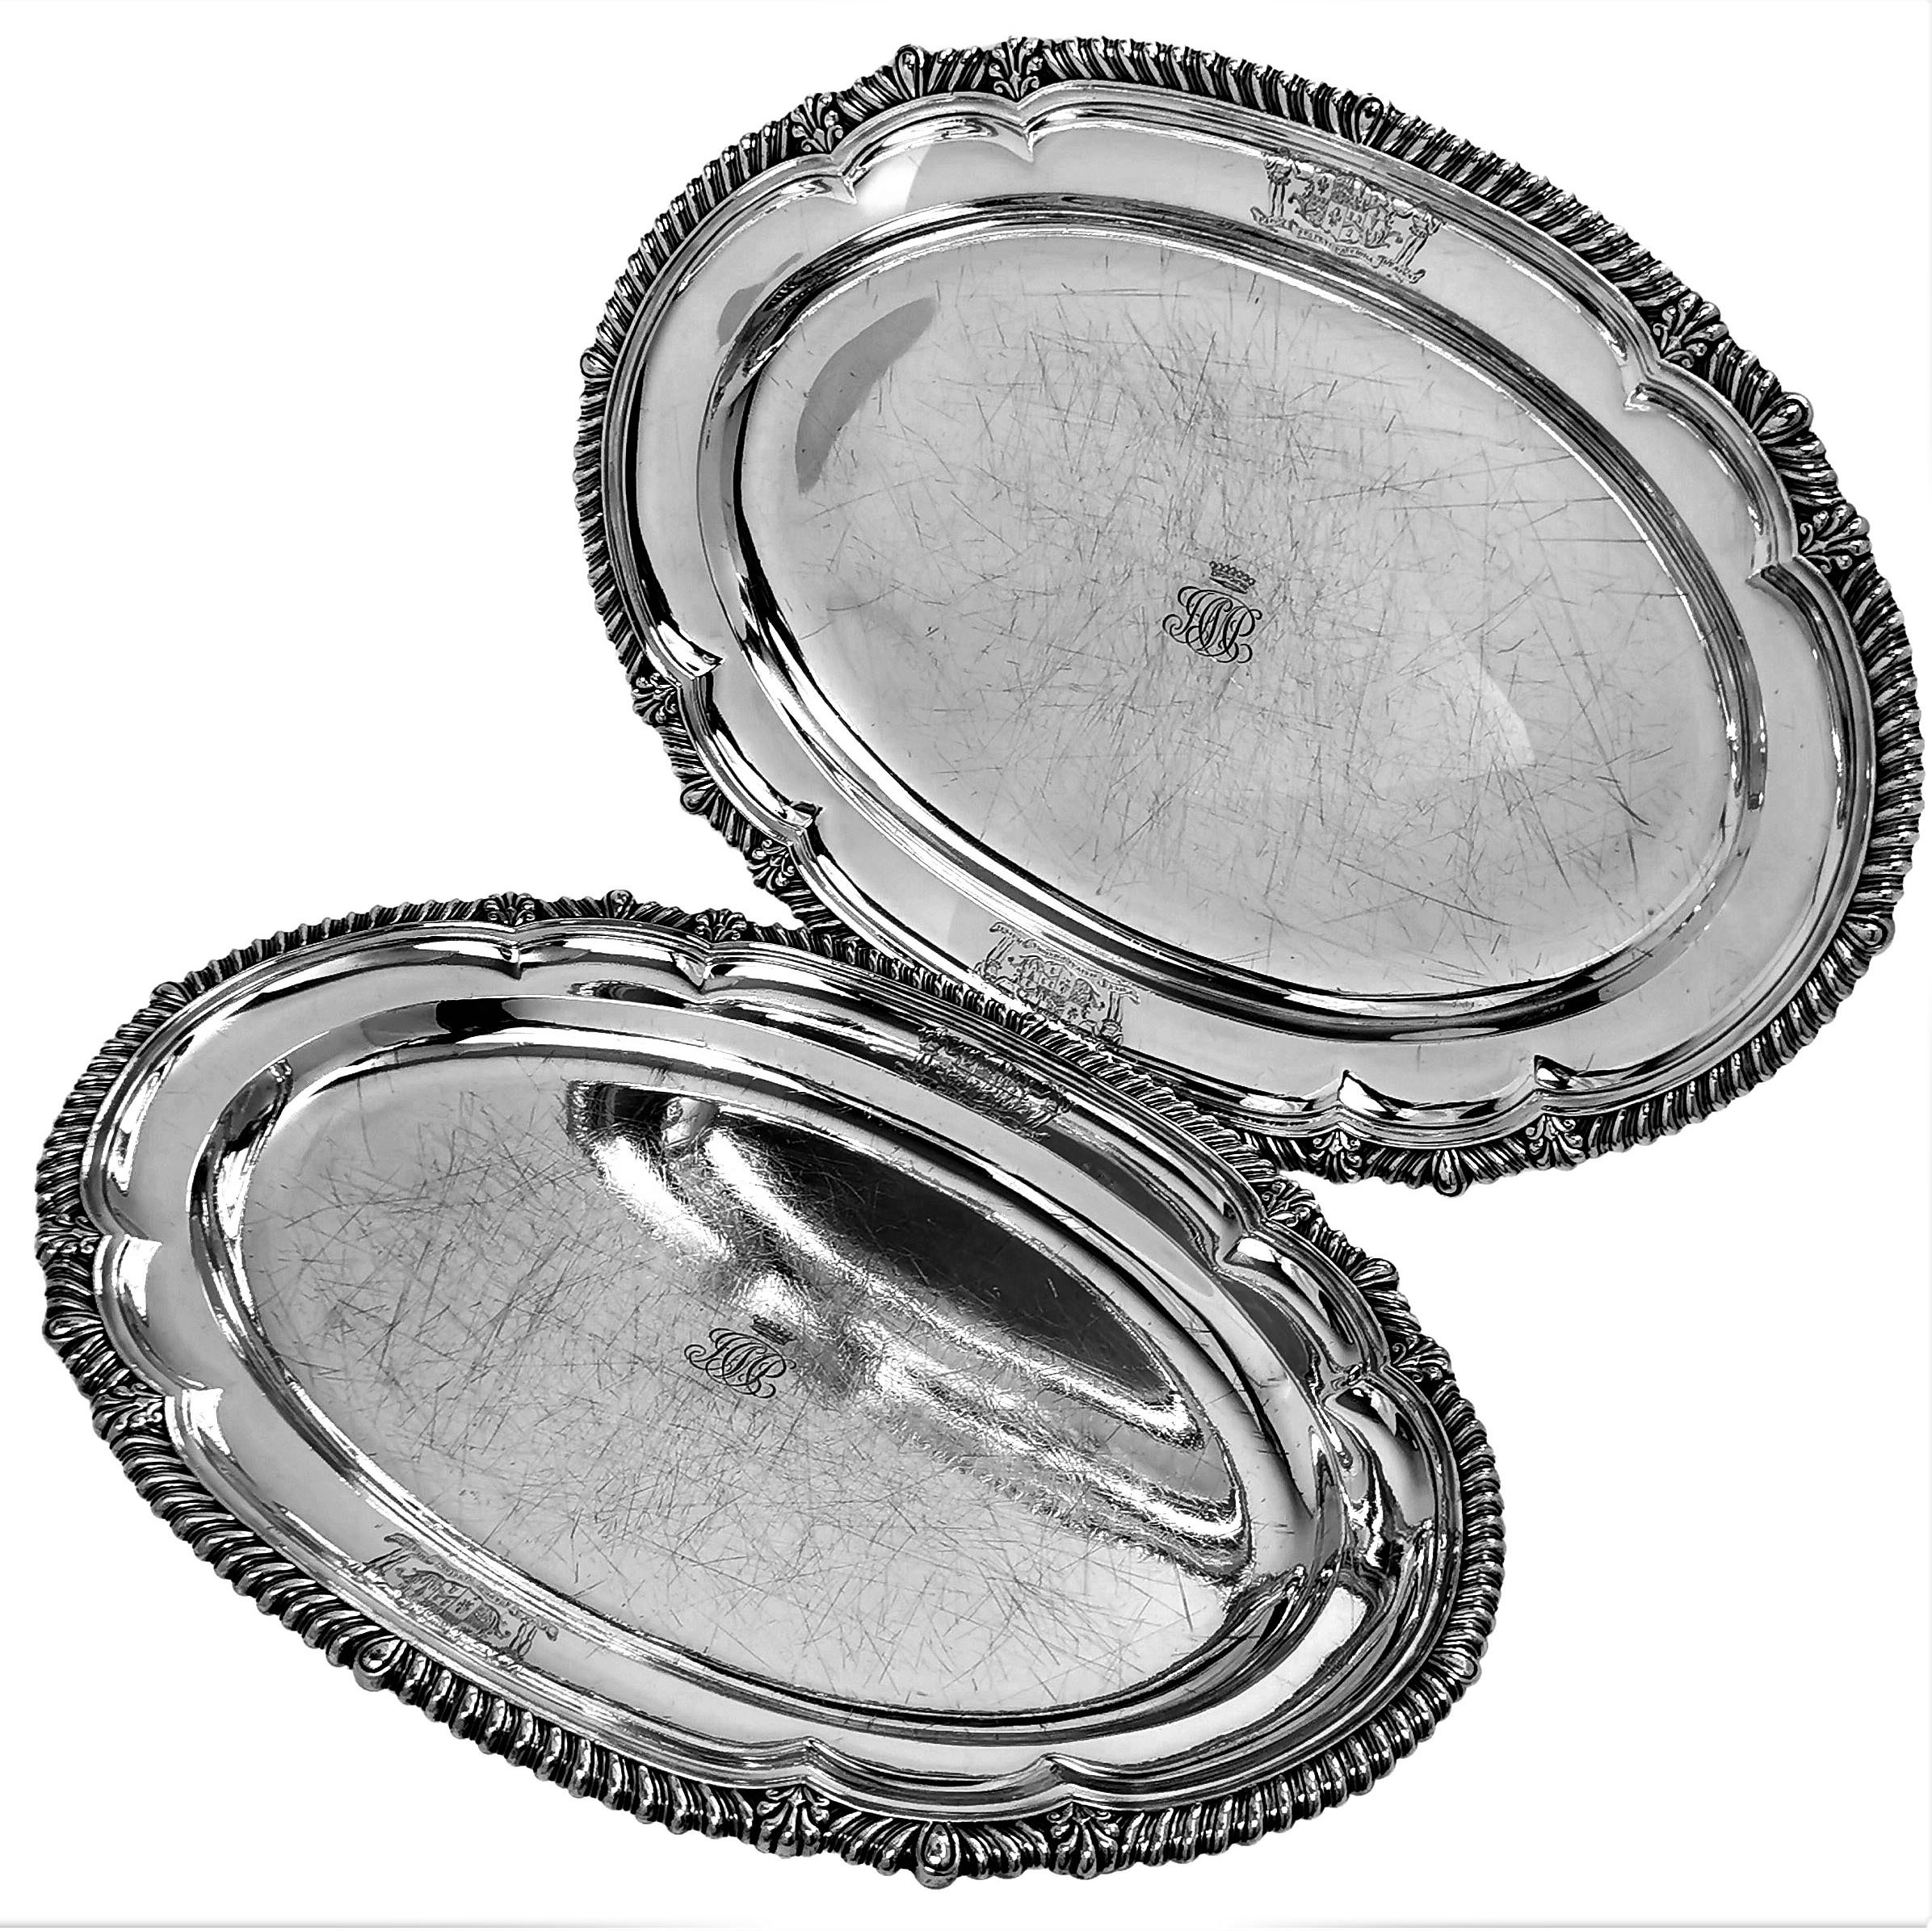 A Set of 11 Antique George III Solid Silver Dinner Plates with a traditional round gadroon border. Each plate has an ornate engraved armorial on the rim.

Made in London, England in 1815 by Robert Garrard.

Approx. Weight - 6684g /